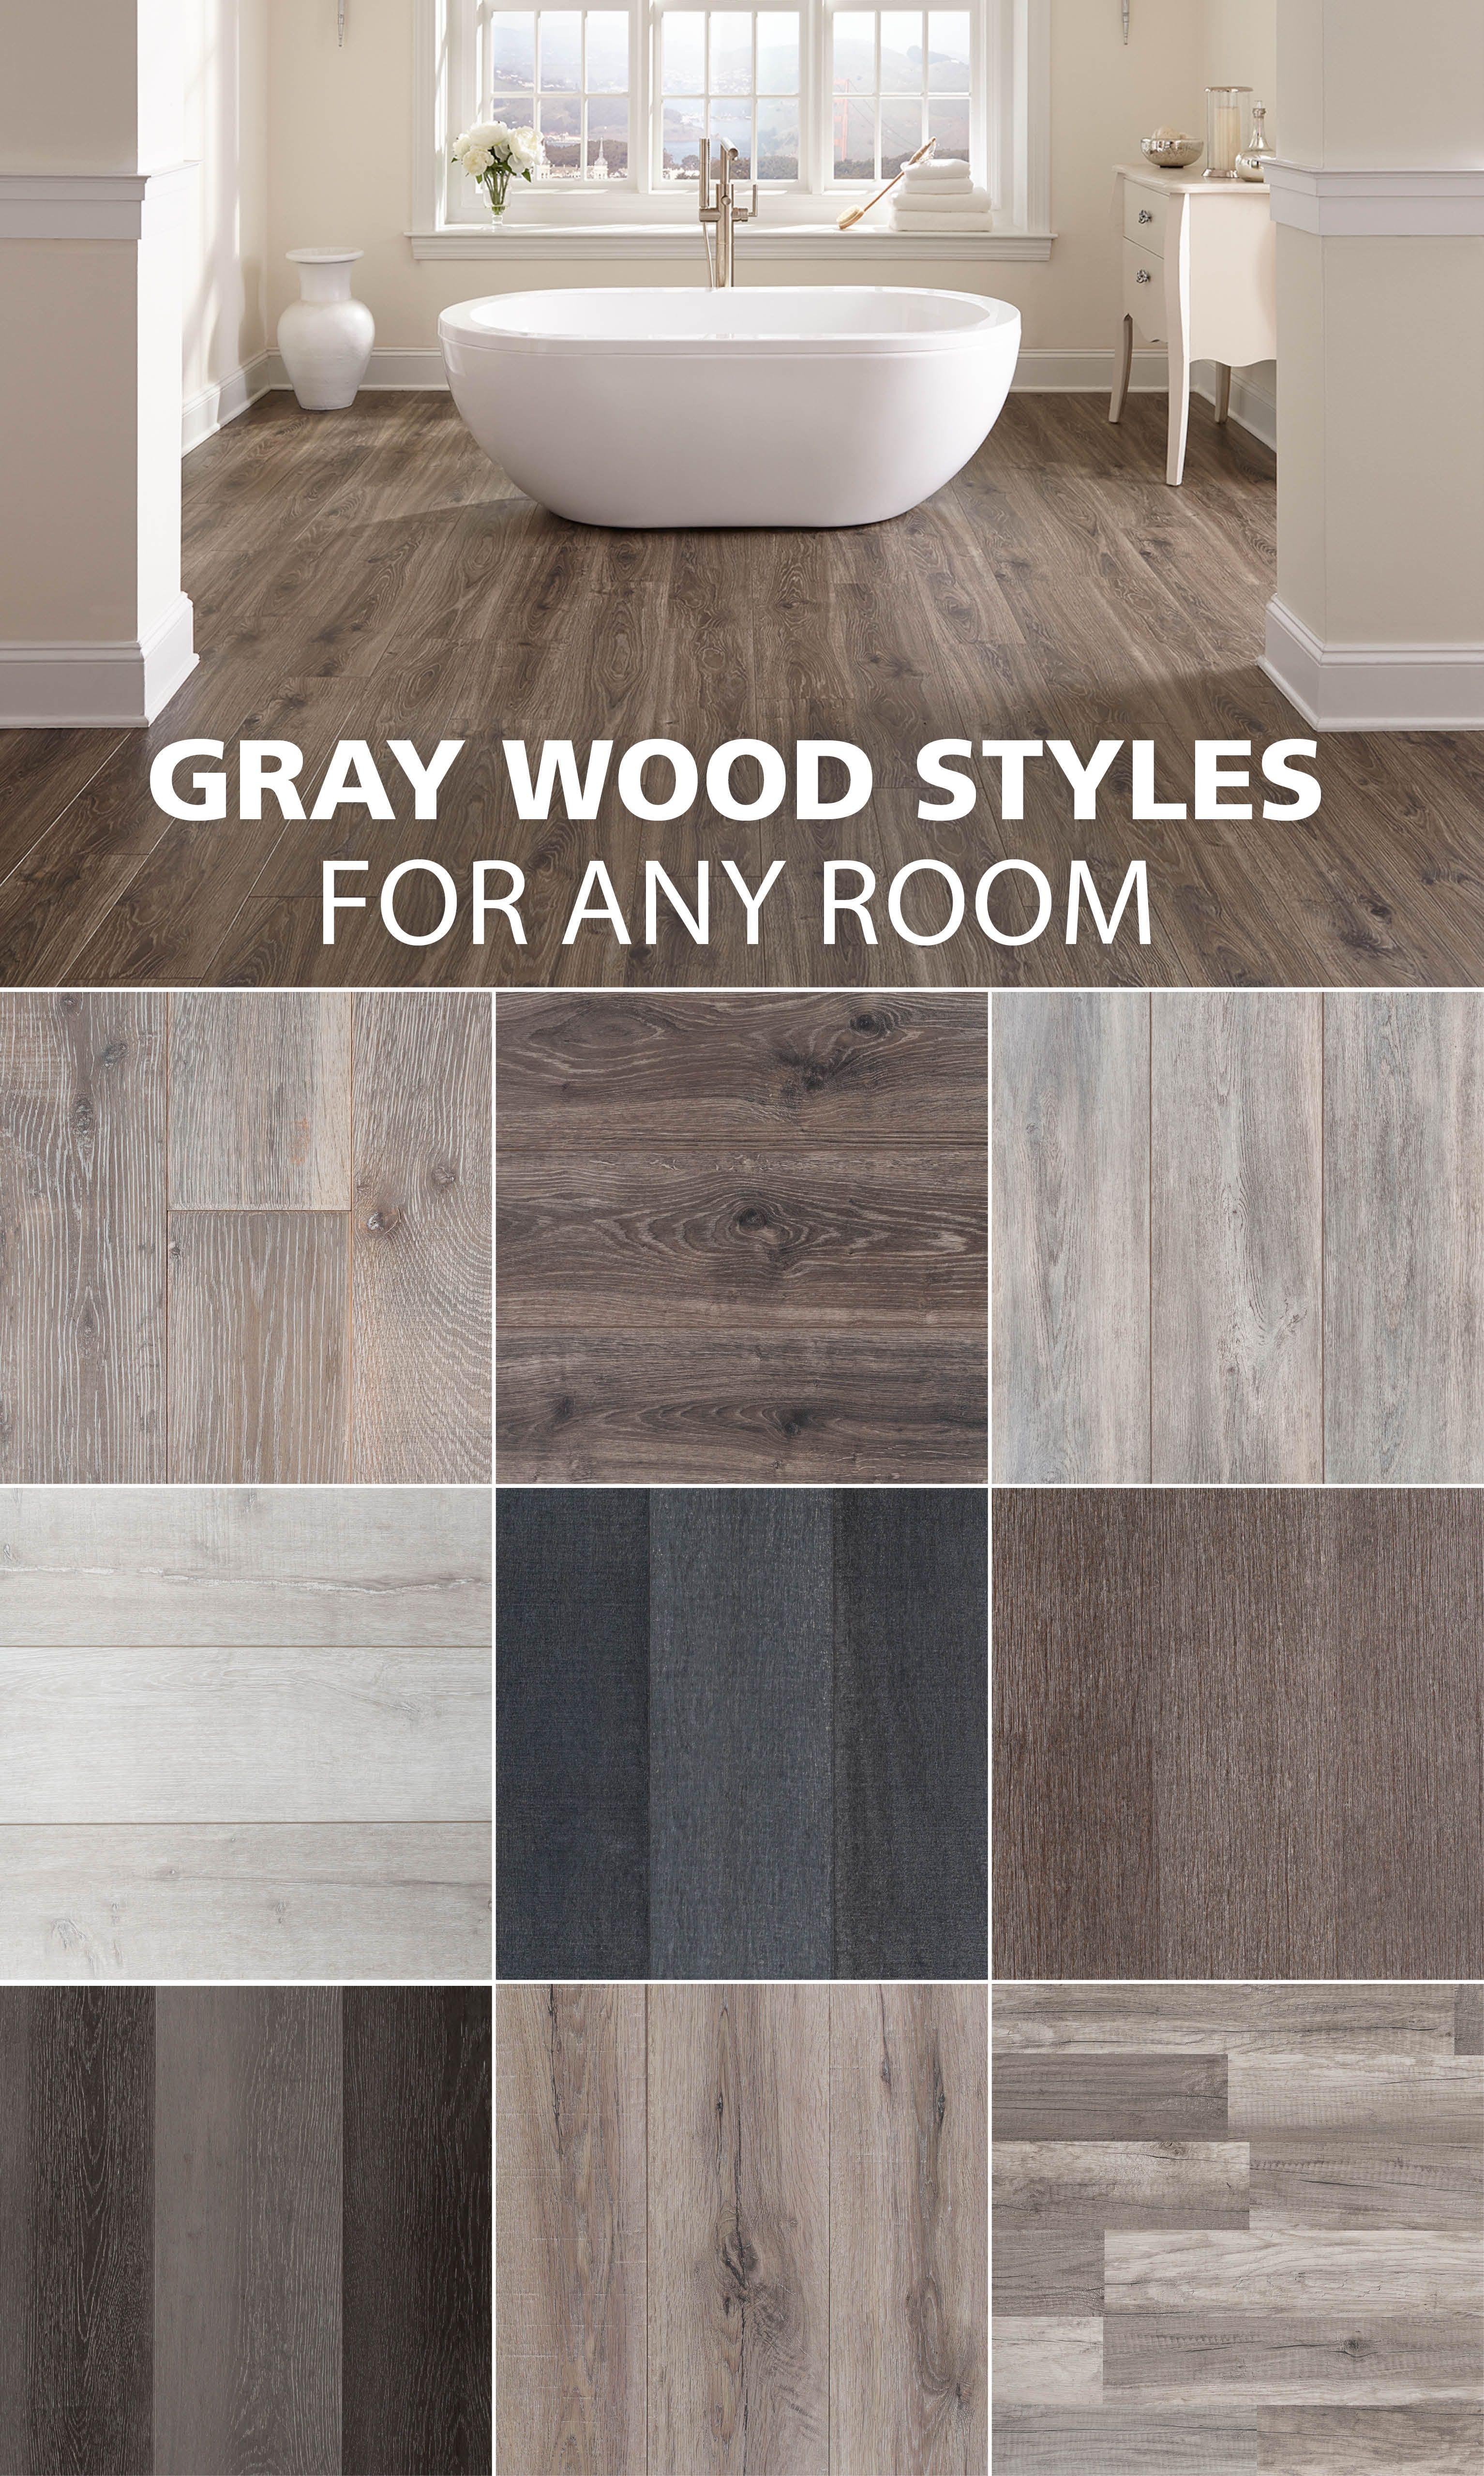 10 Cute Most Popular Hardwood Floor Colors 2017 2024 free download most popular hardwood floor colors 2017 of here are some of our favorite gray wood look styles home decor with regard to here are some of our favorite gray wood look styles